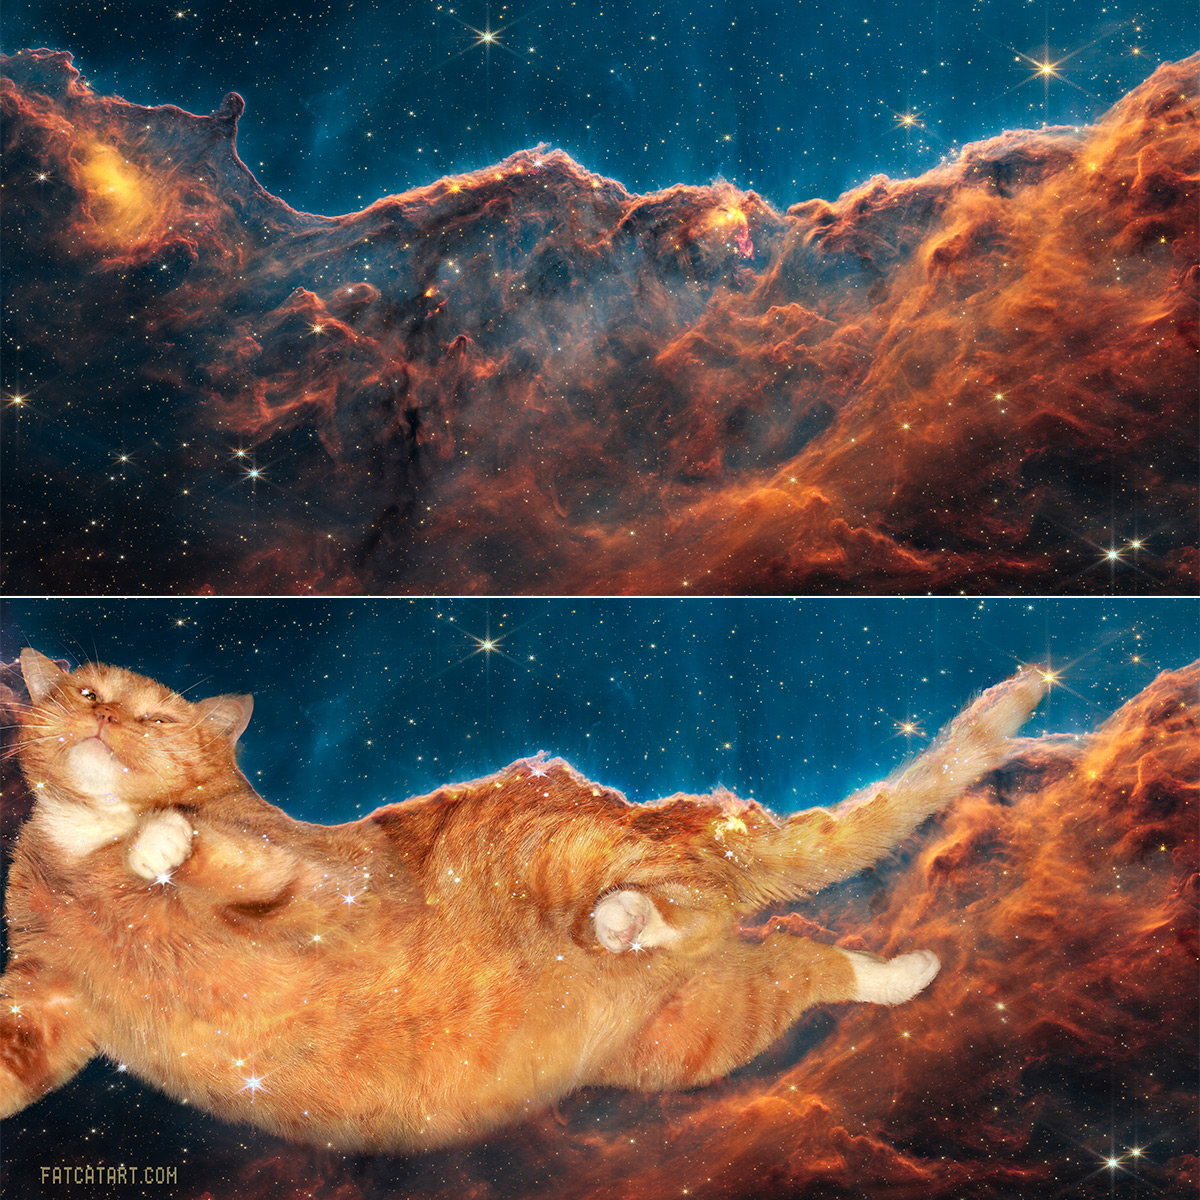 Zarathustra the Cat as the main cause of new stars formation